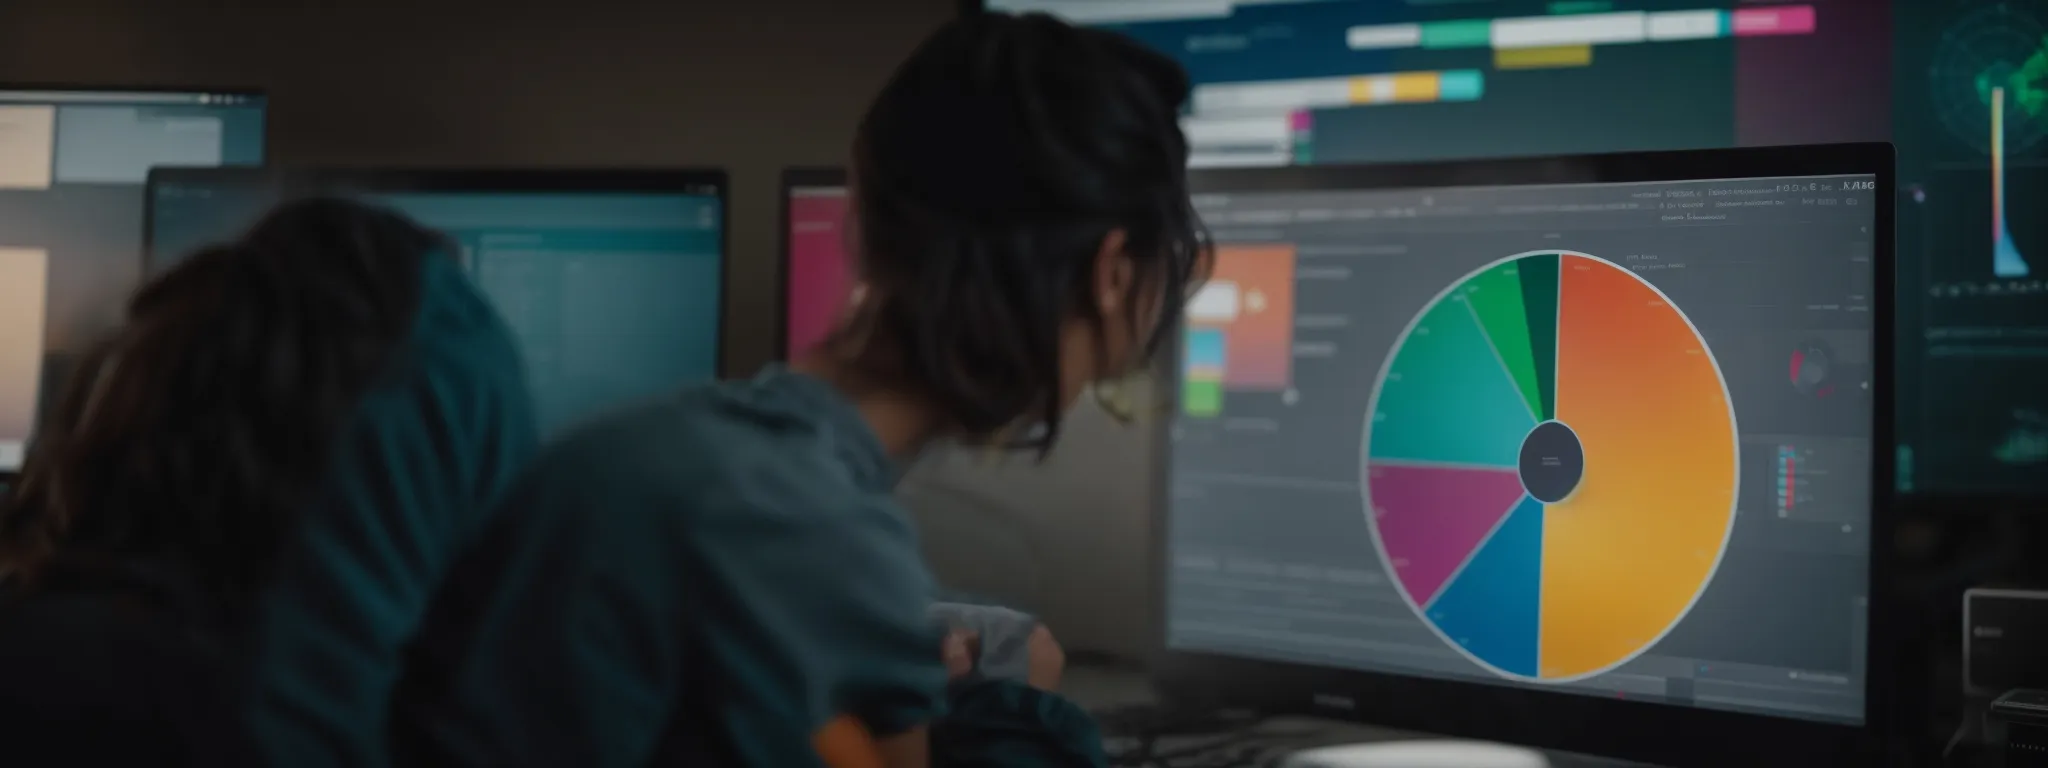 a focused individual analyzes a colorful pie chart on a computer screen, highlighting different segments of search engine market share.